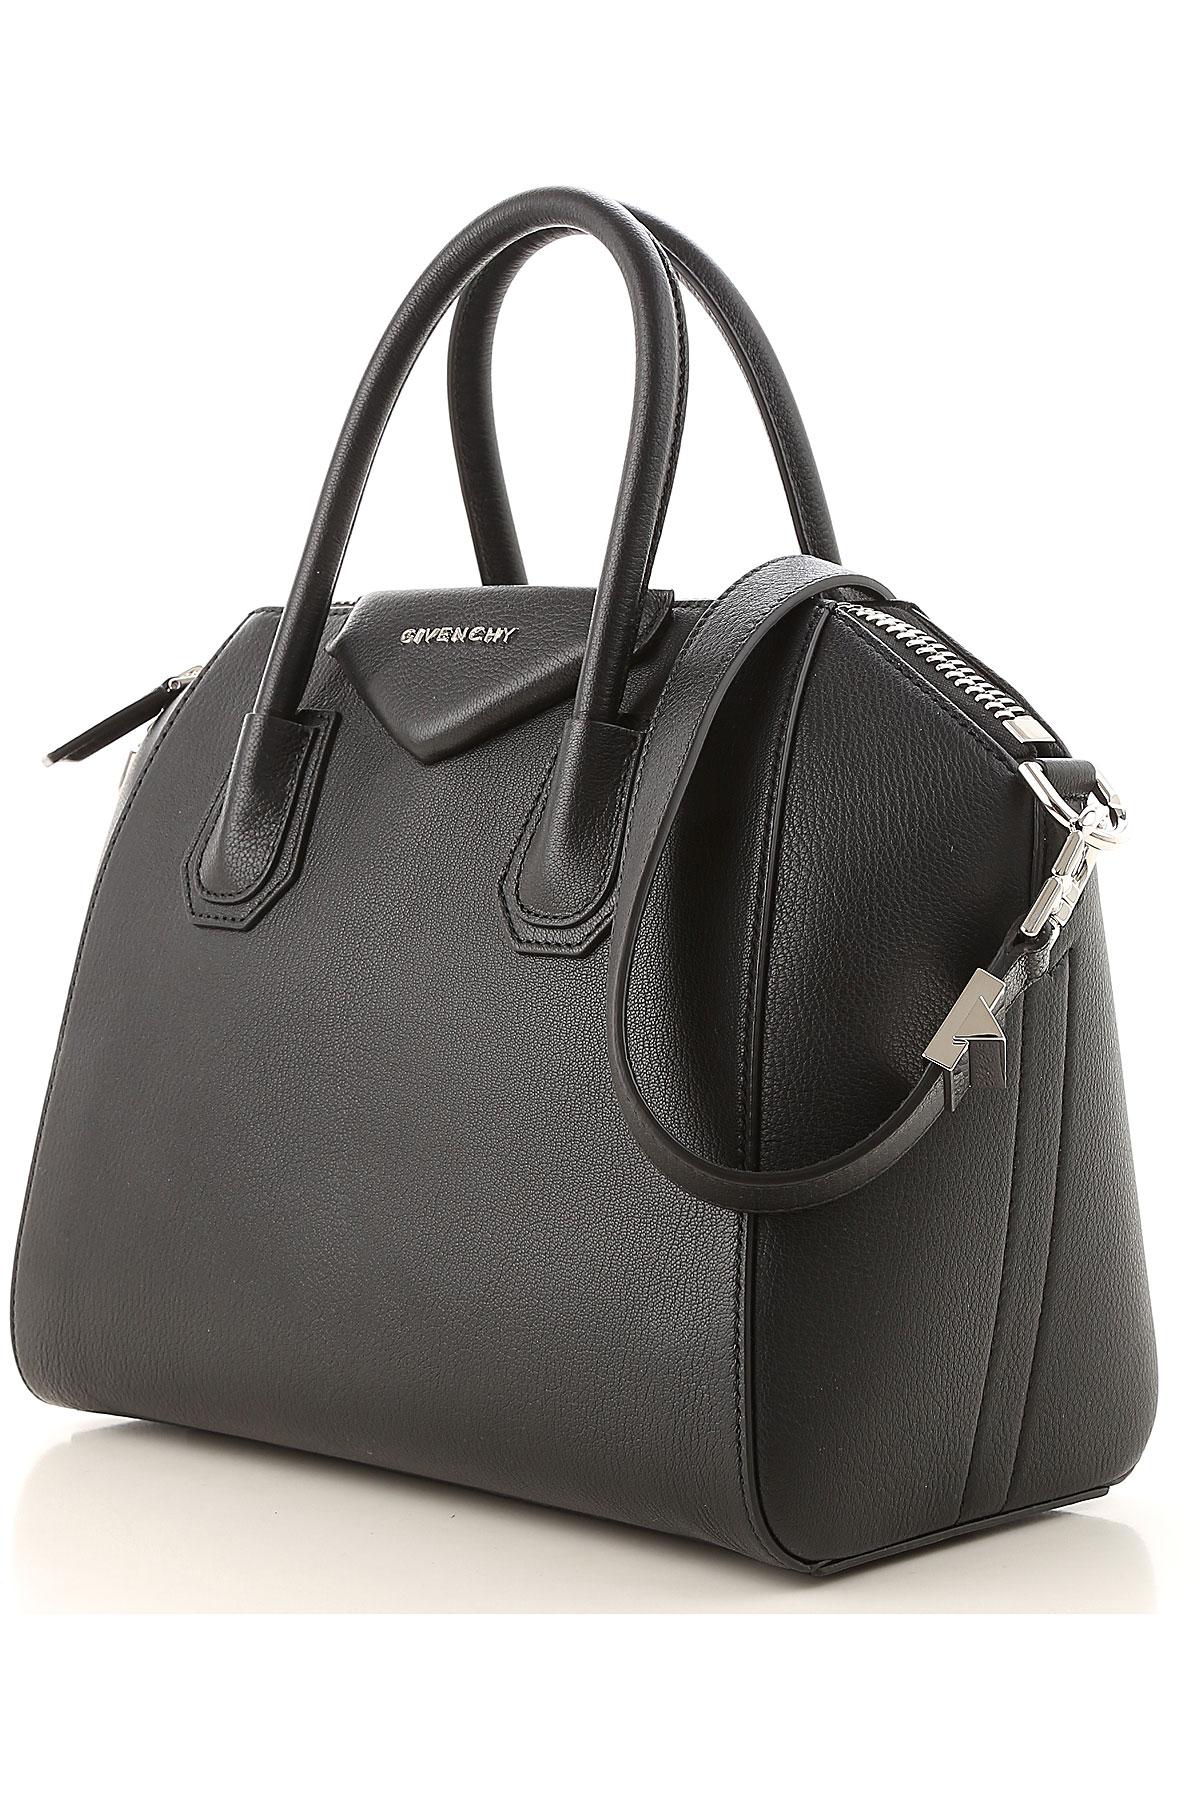 Givenchy Leather Handbags On Sale in Black - Lyst